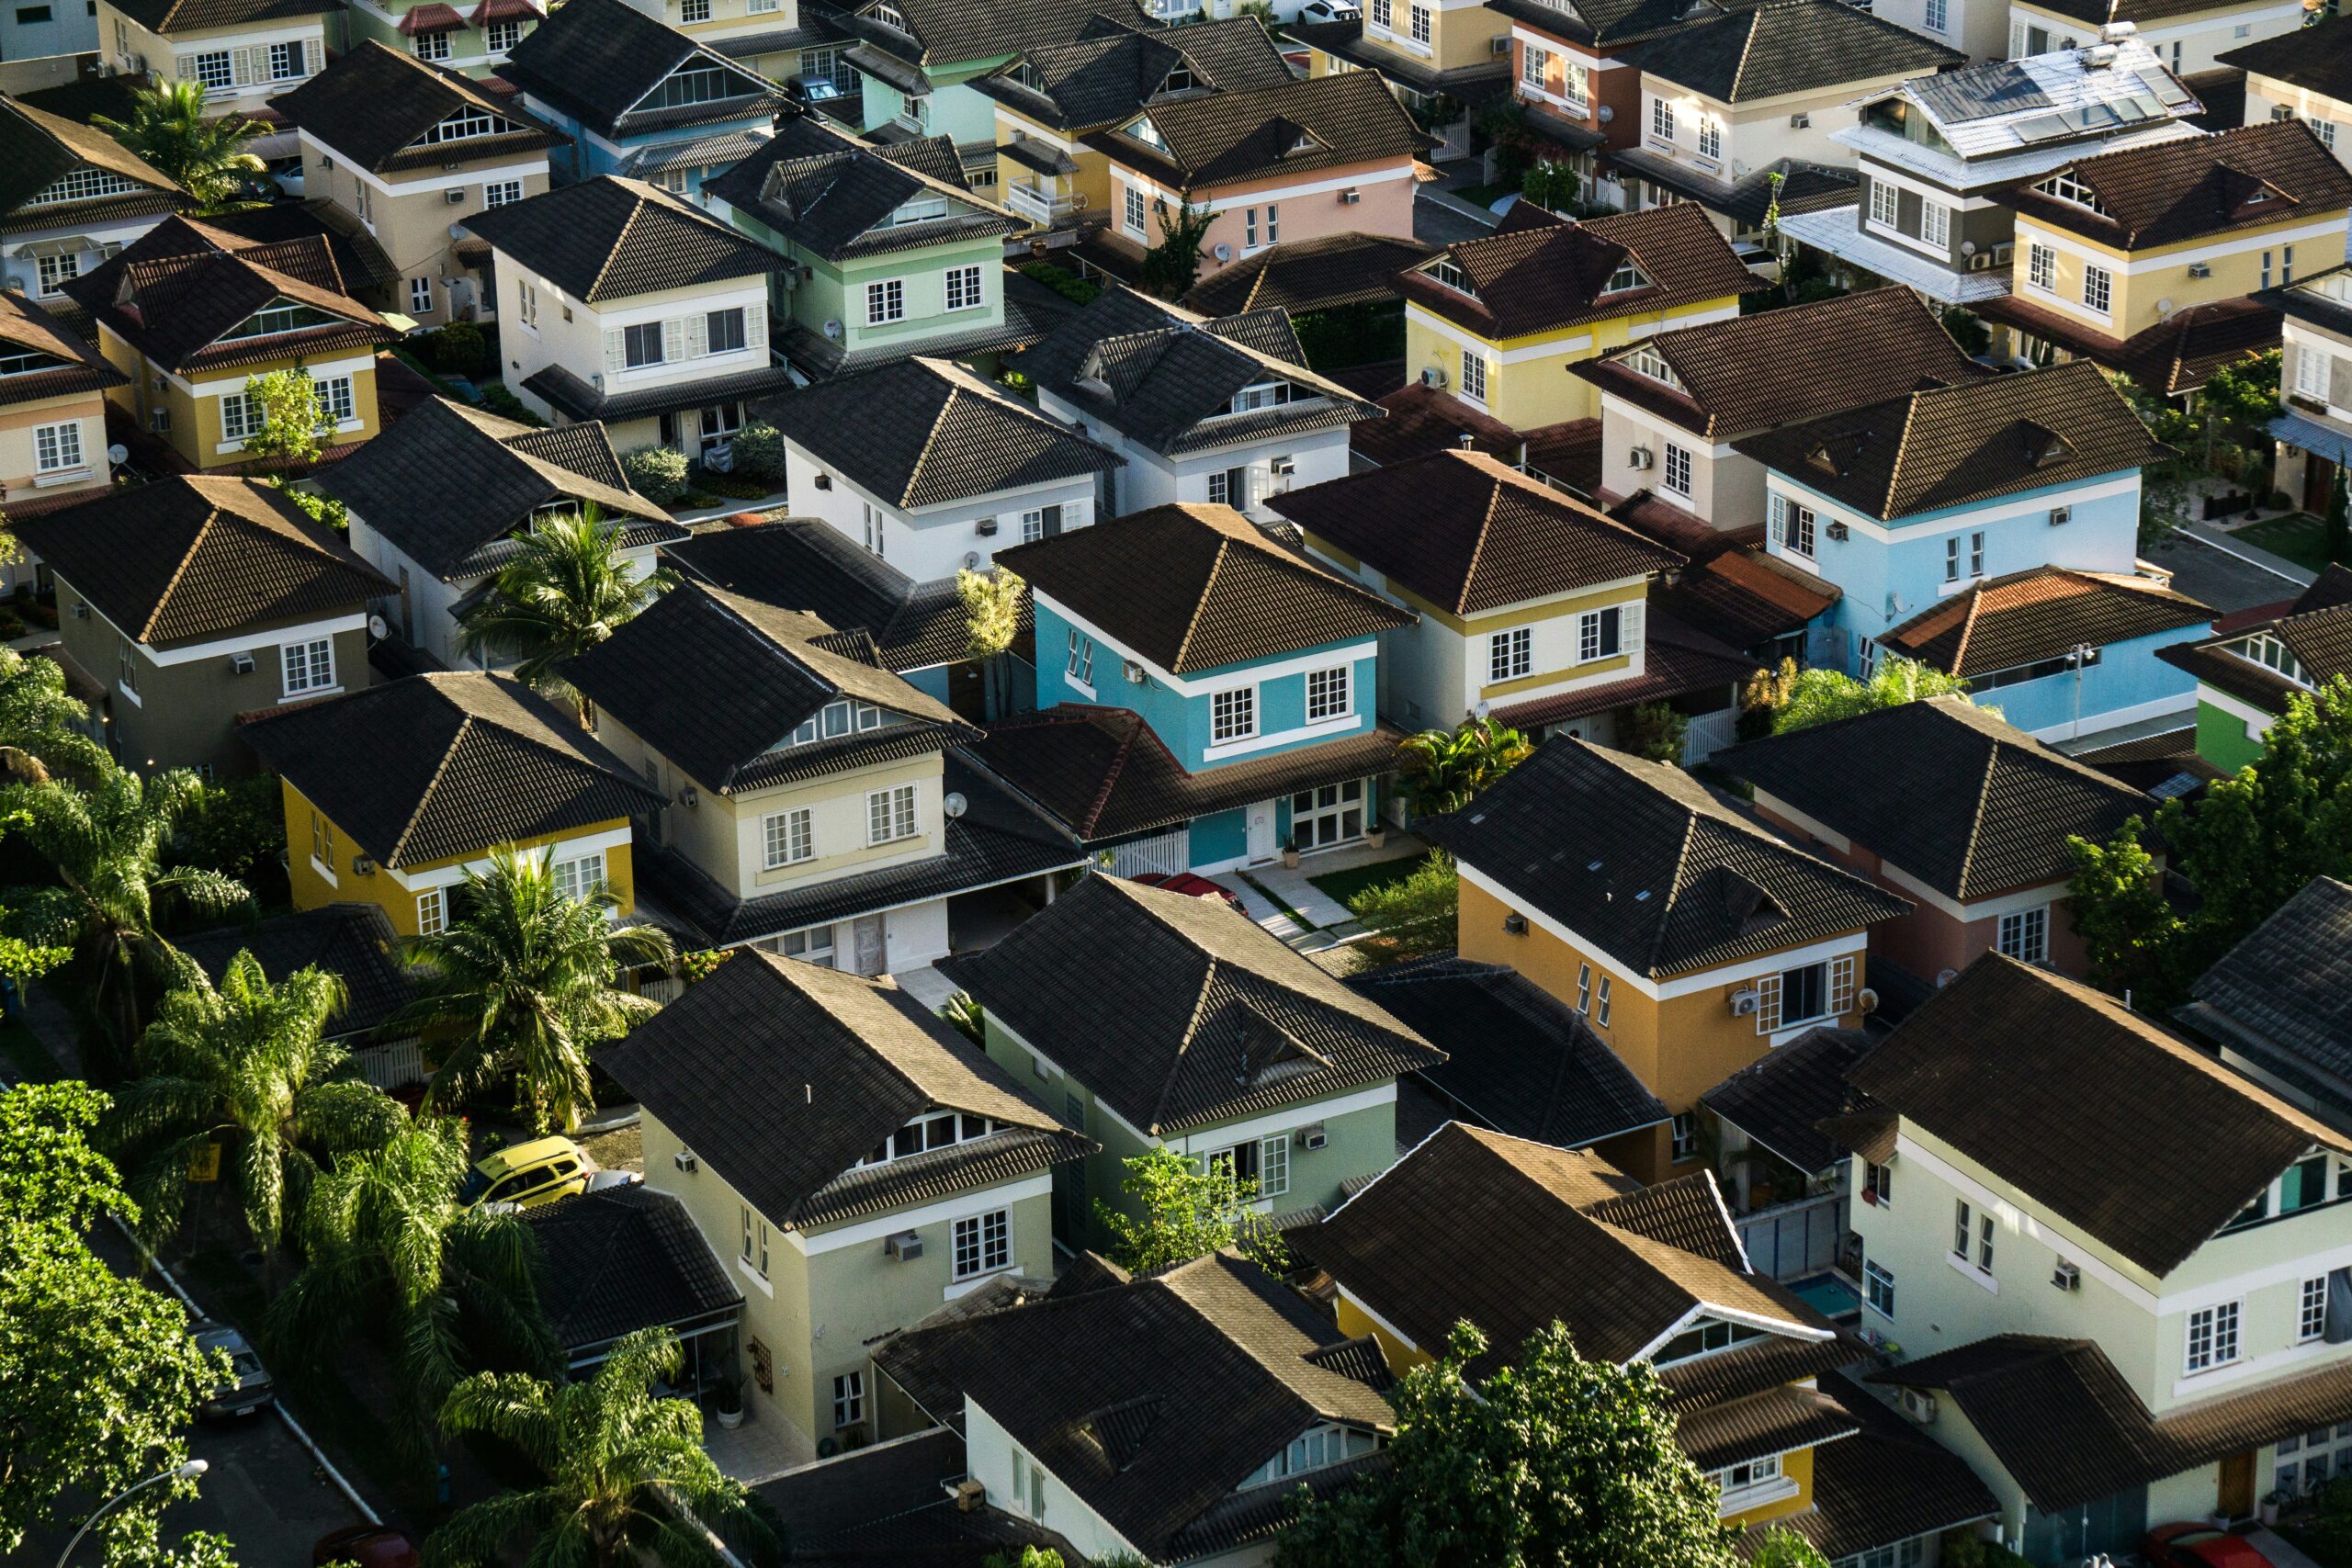 A photo of rows of houses in the suburbs, all painted in different colors.